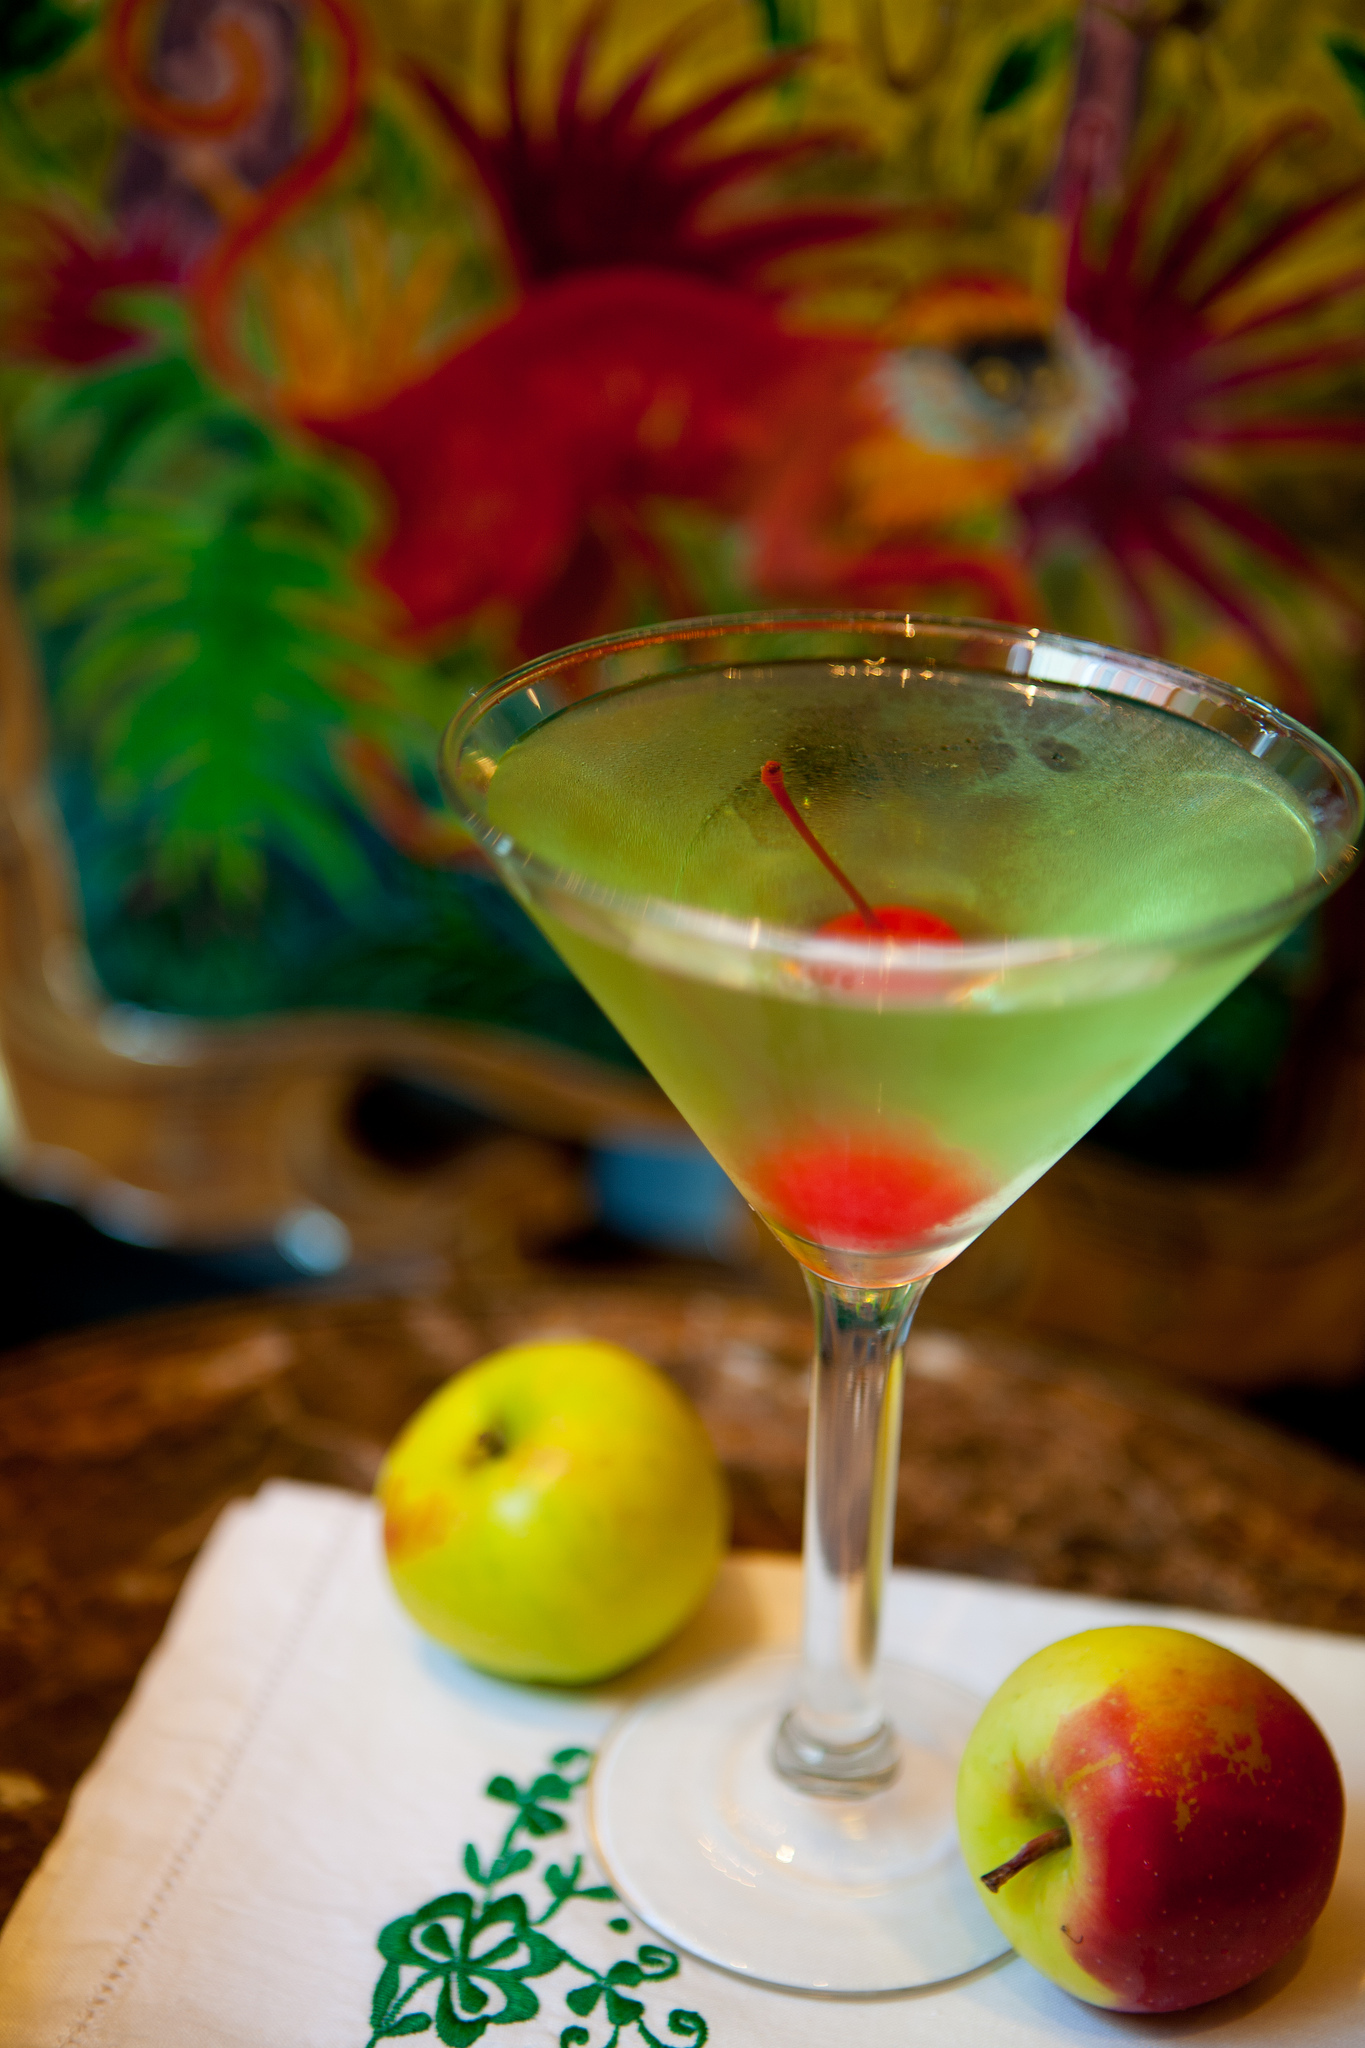 Our take on a sour apple martini, this cocktail from the Carousel Bar is a tart treat you won't want to miss!